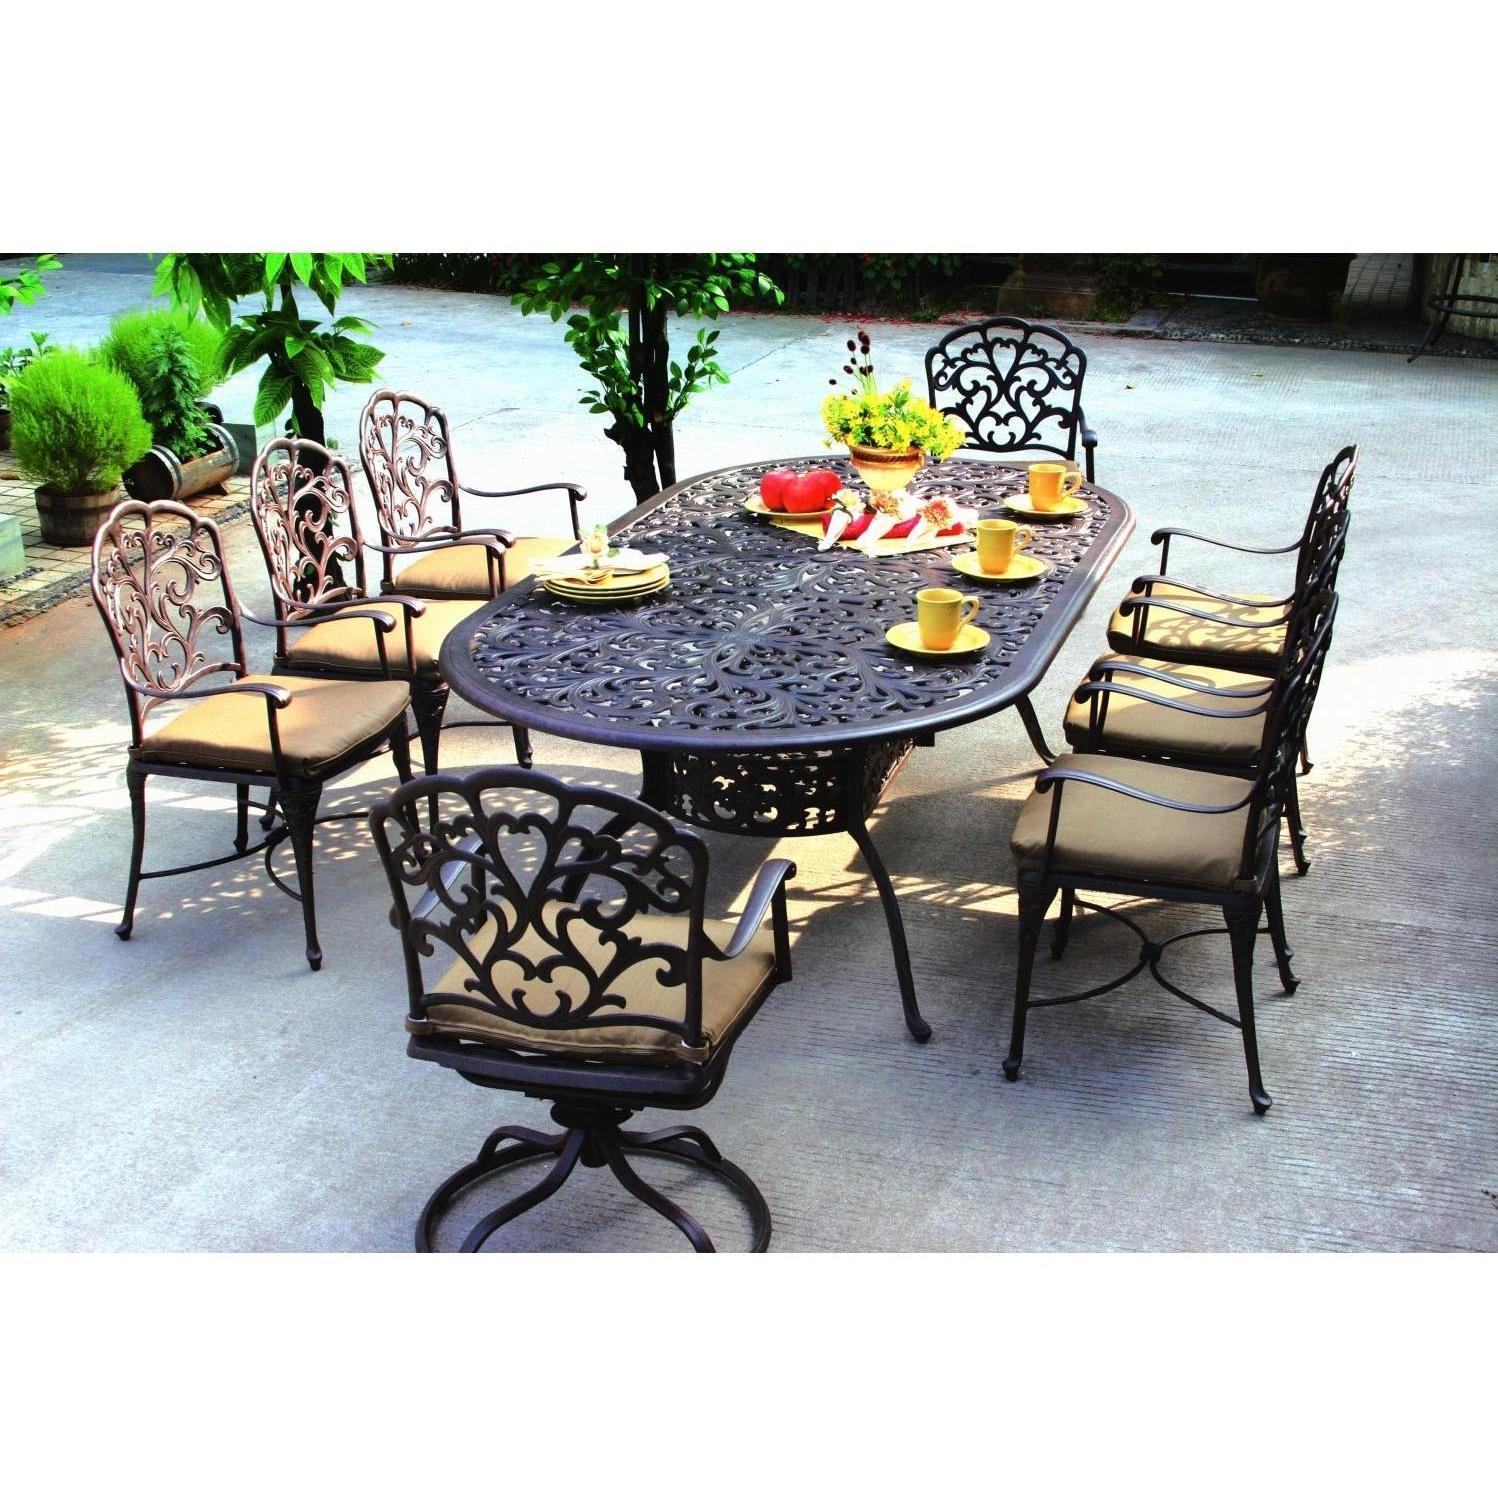 patio dining sets photo - 5